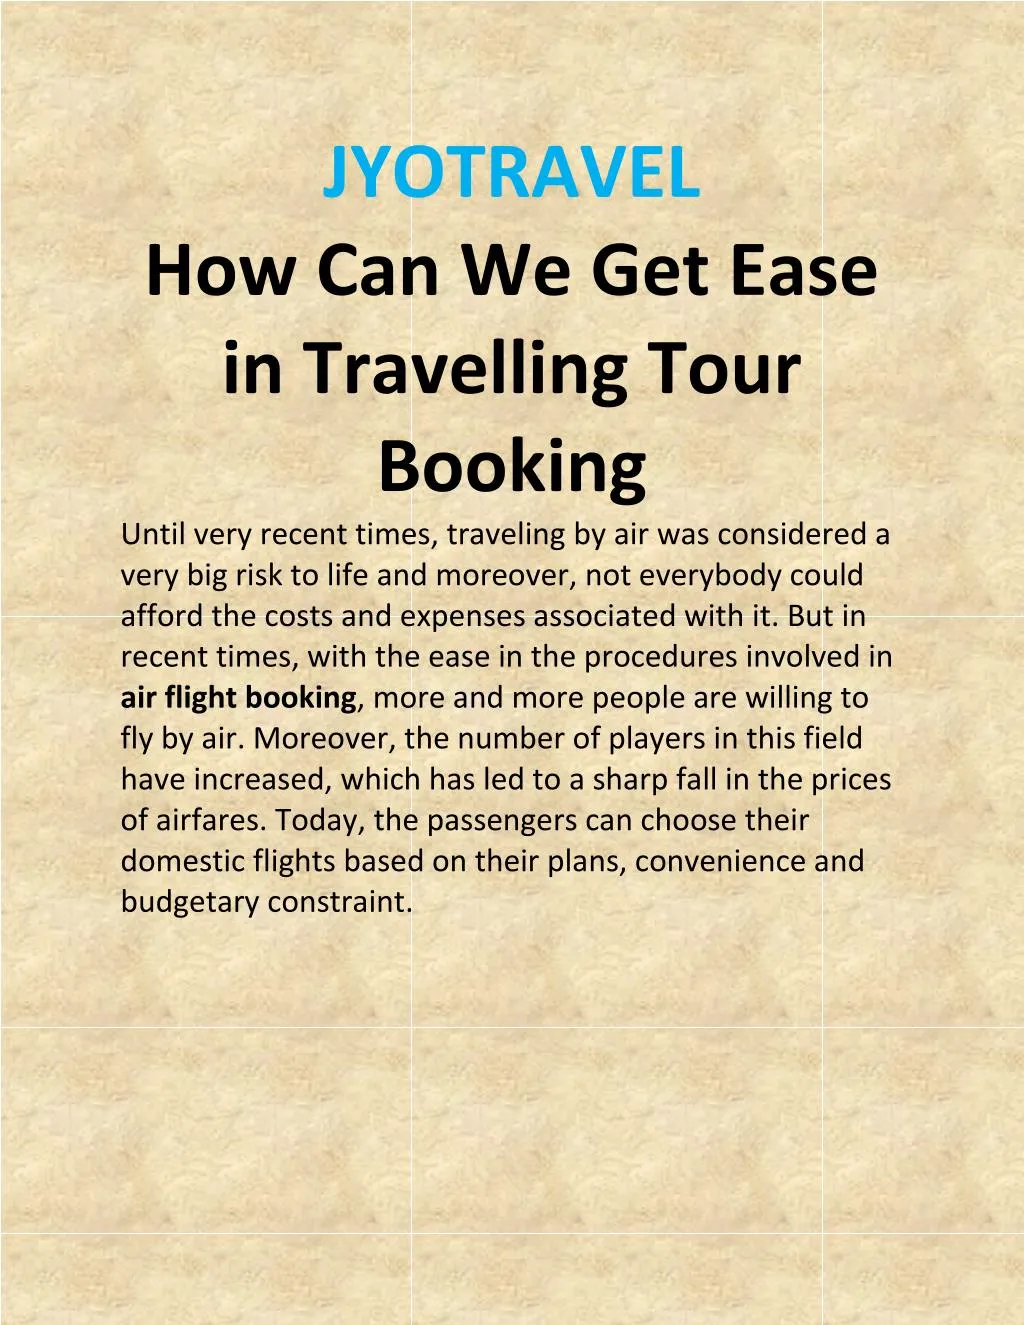 jyotravel how can we get ease in travelling tour